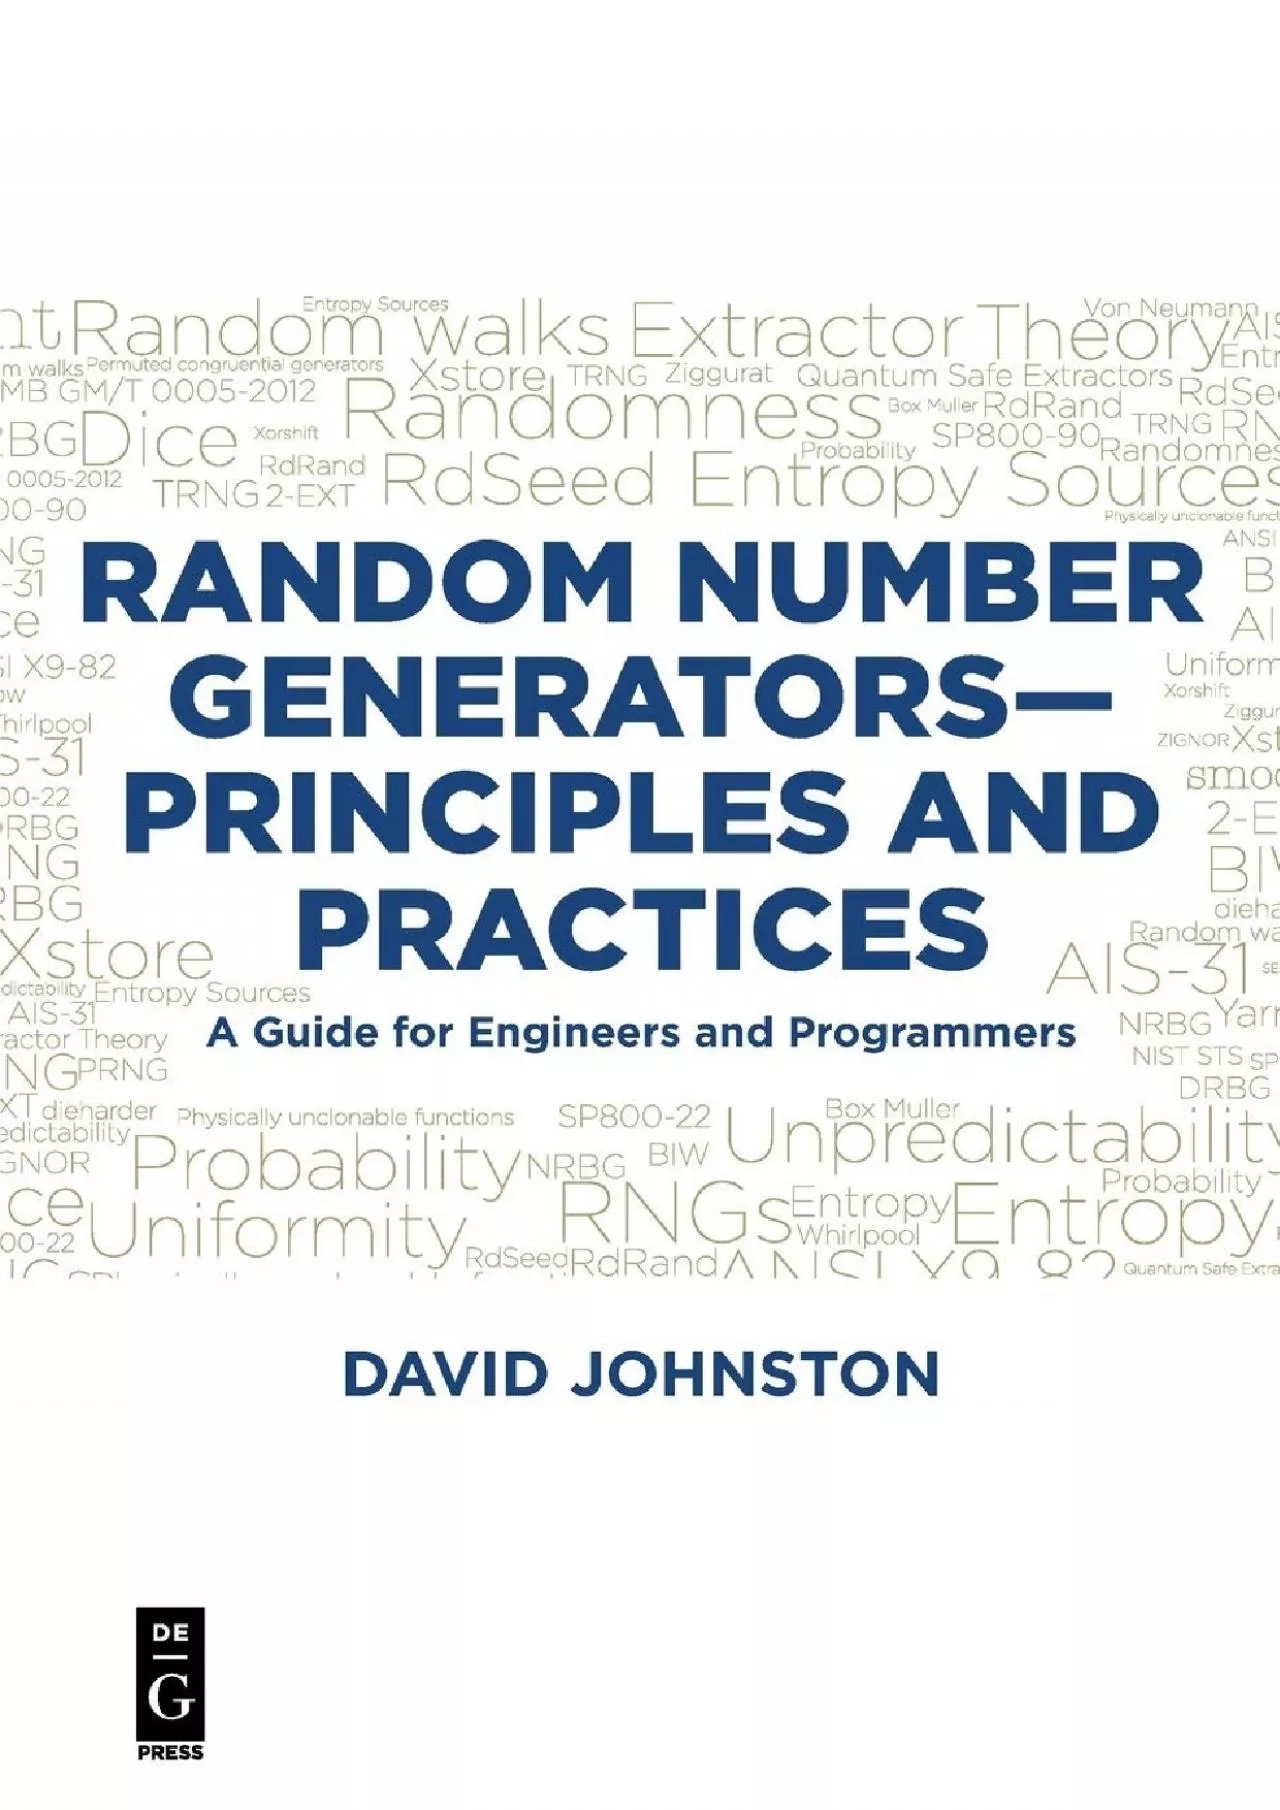 (DOWNLOAD)-Random Number Generators—Principles and Practices: A Guide for Engineers